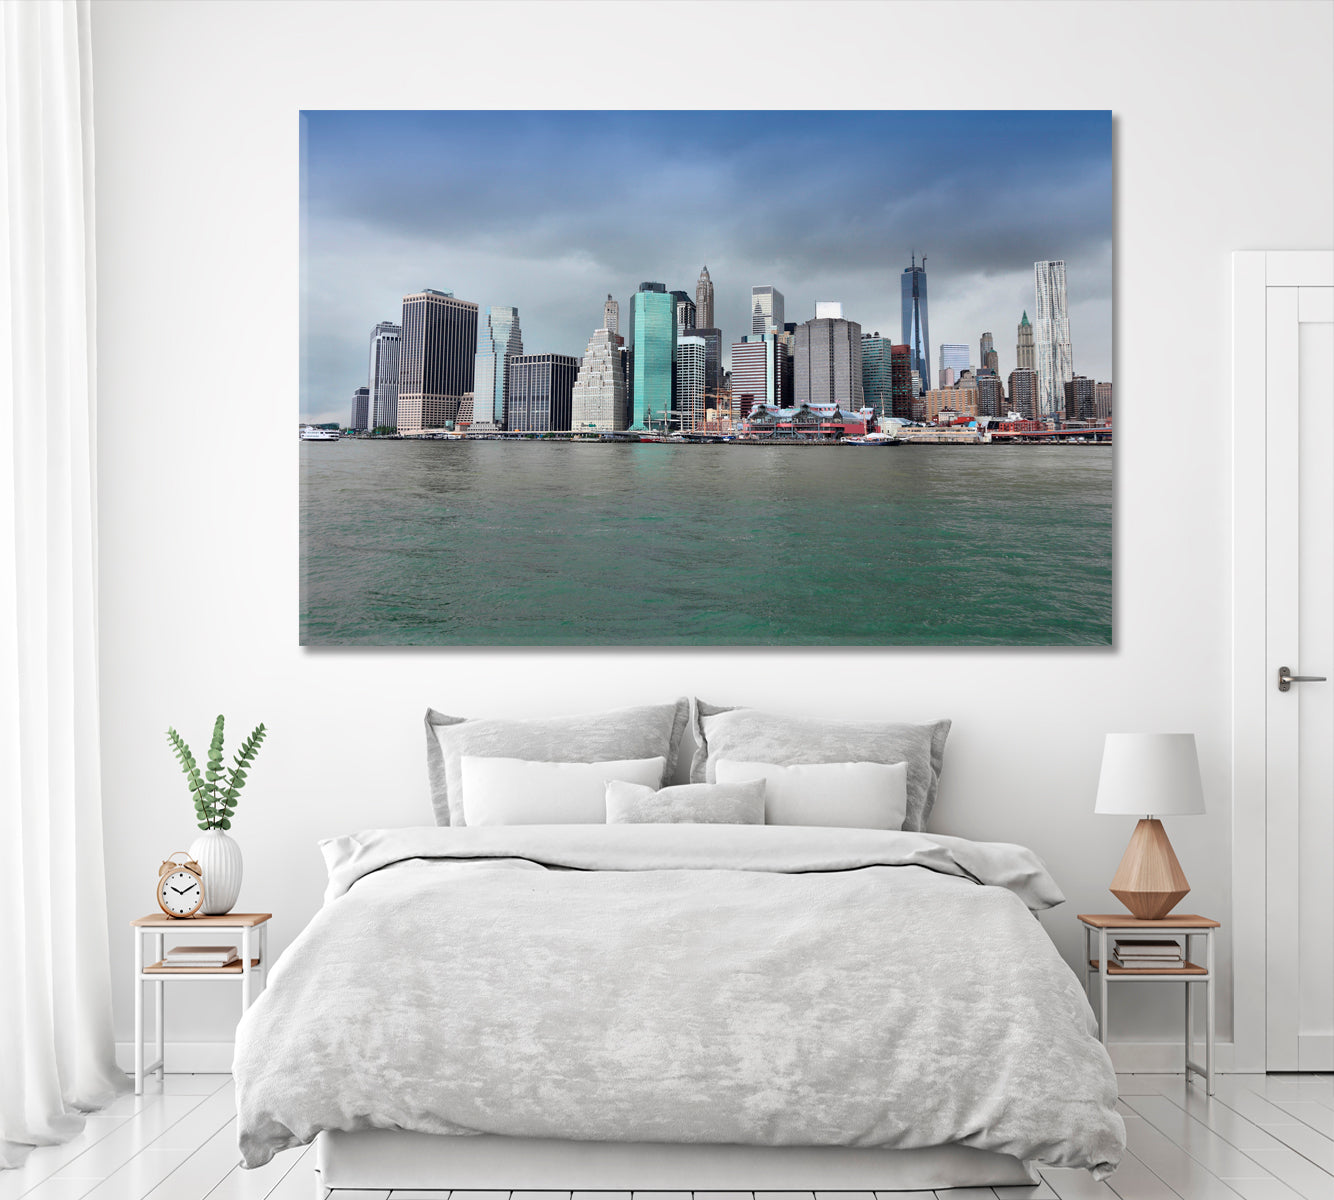 Storm Clouds over Manhattan New York City Canvas Print ArtLexy 1 Panel 24"x16" inches 